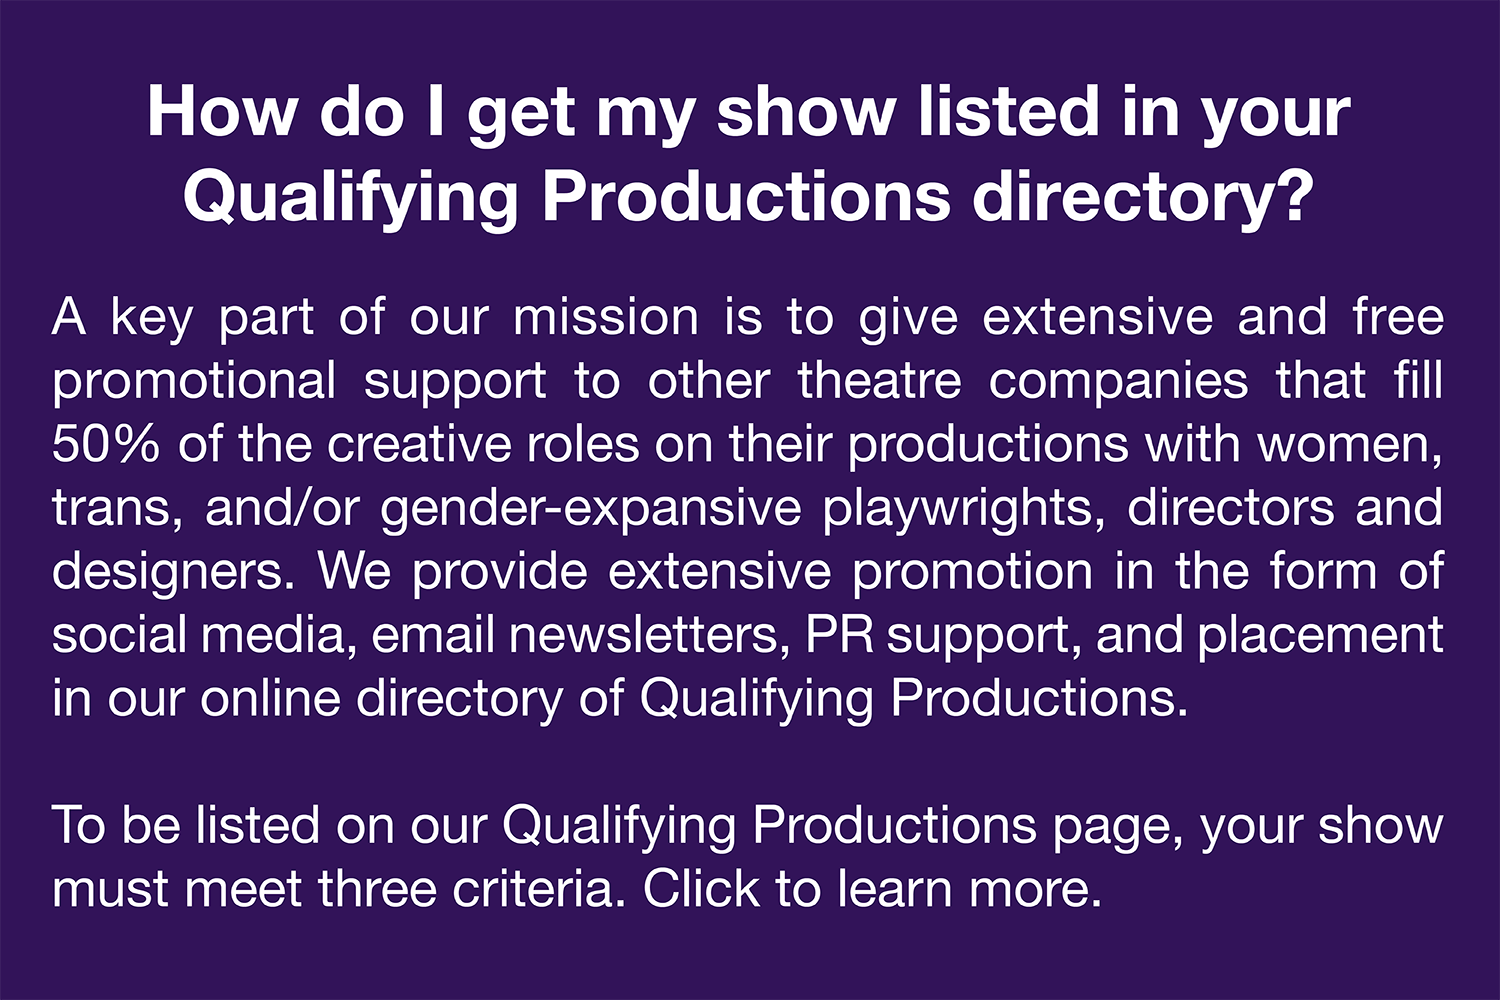   How do I get my show listed in your Qualifying Productions directory?   A key part of our mission is to give extensive and free promotional support to other theatre companies that fill 50% of the creative roles on their productions with women, tran